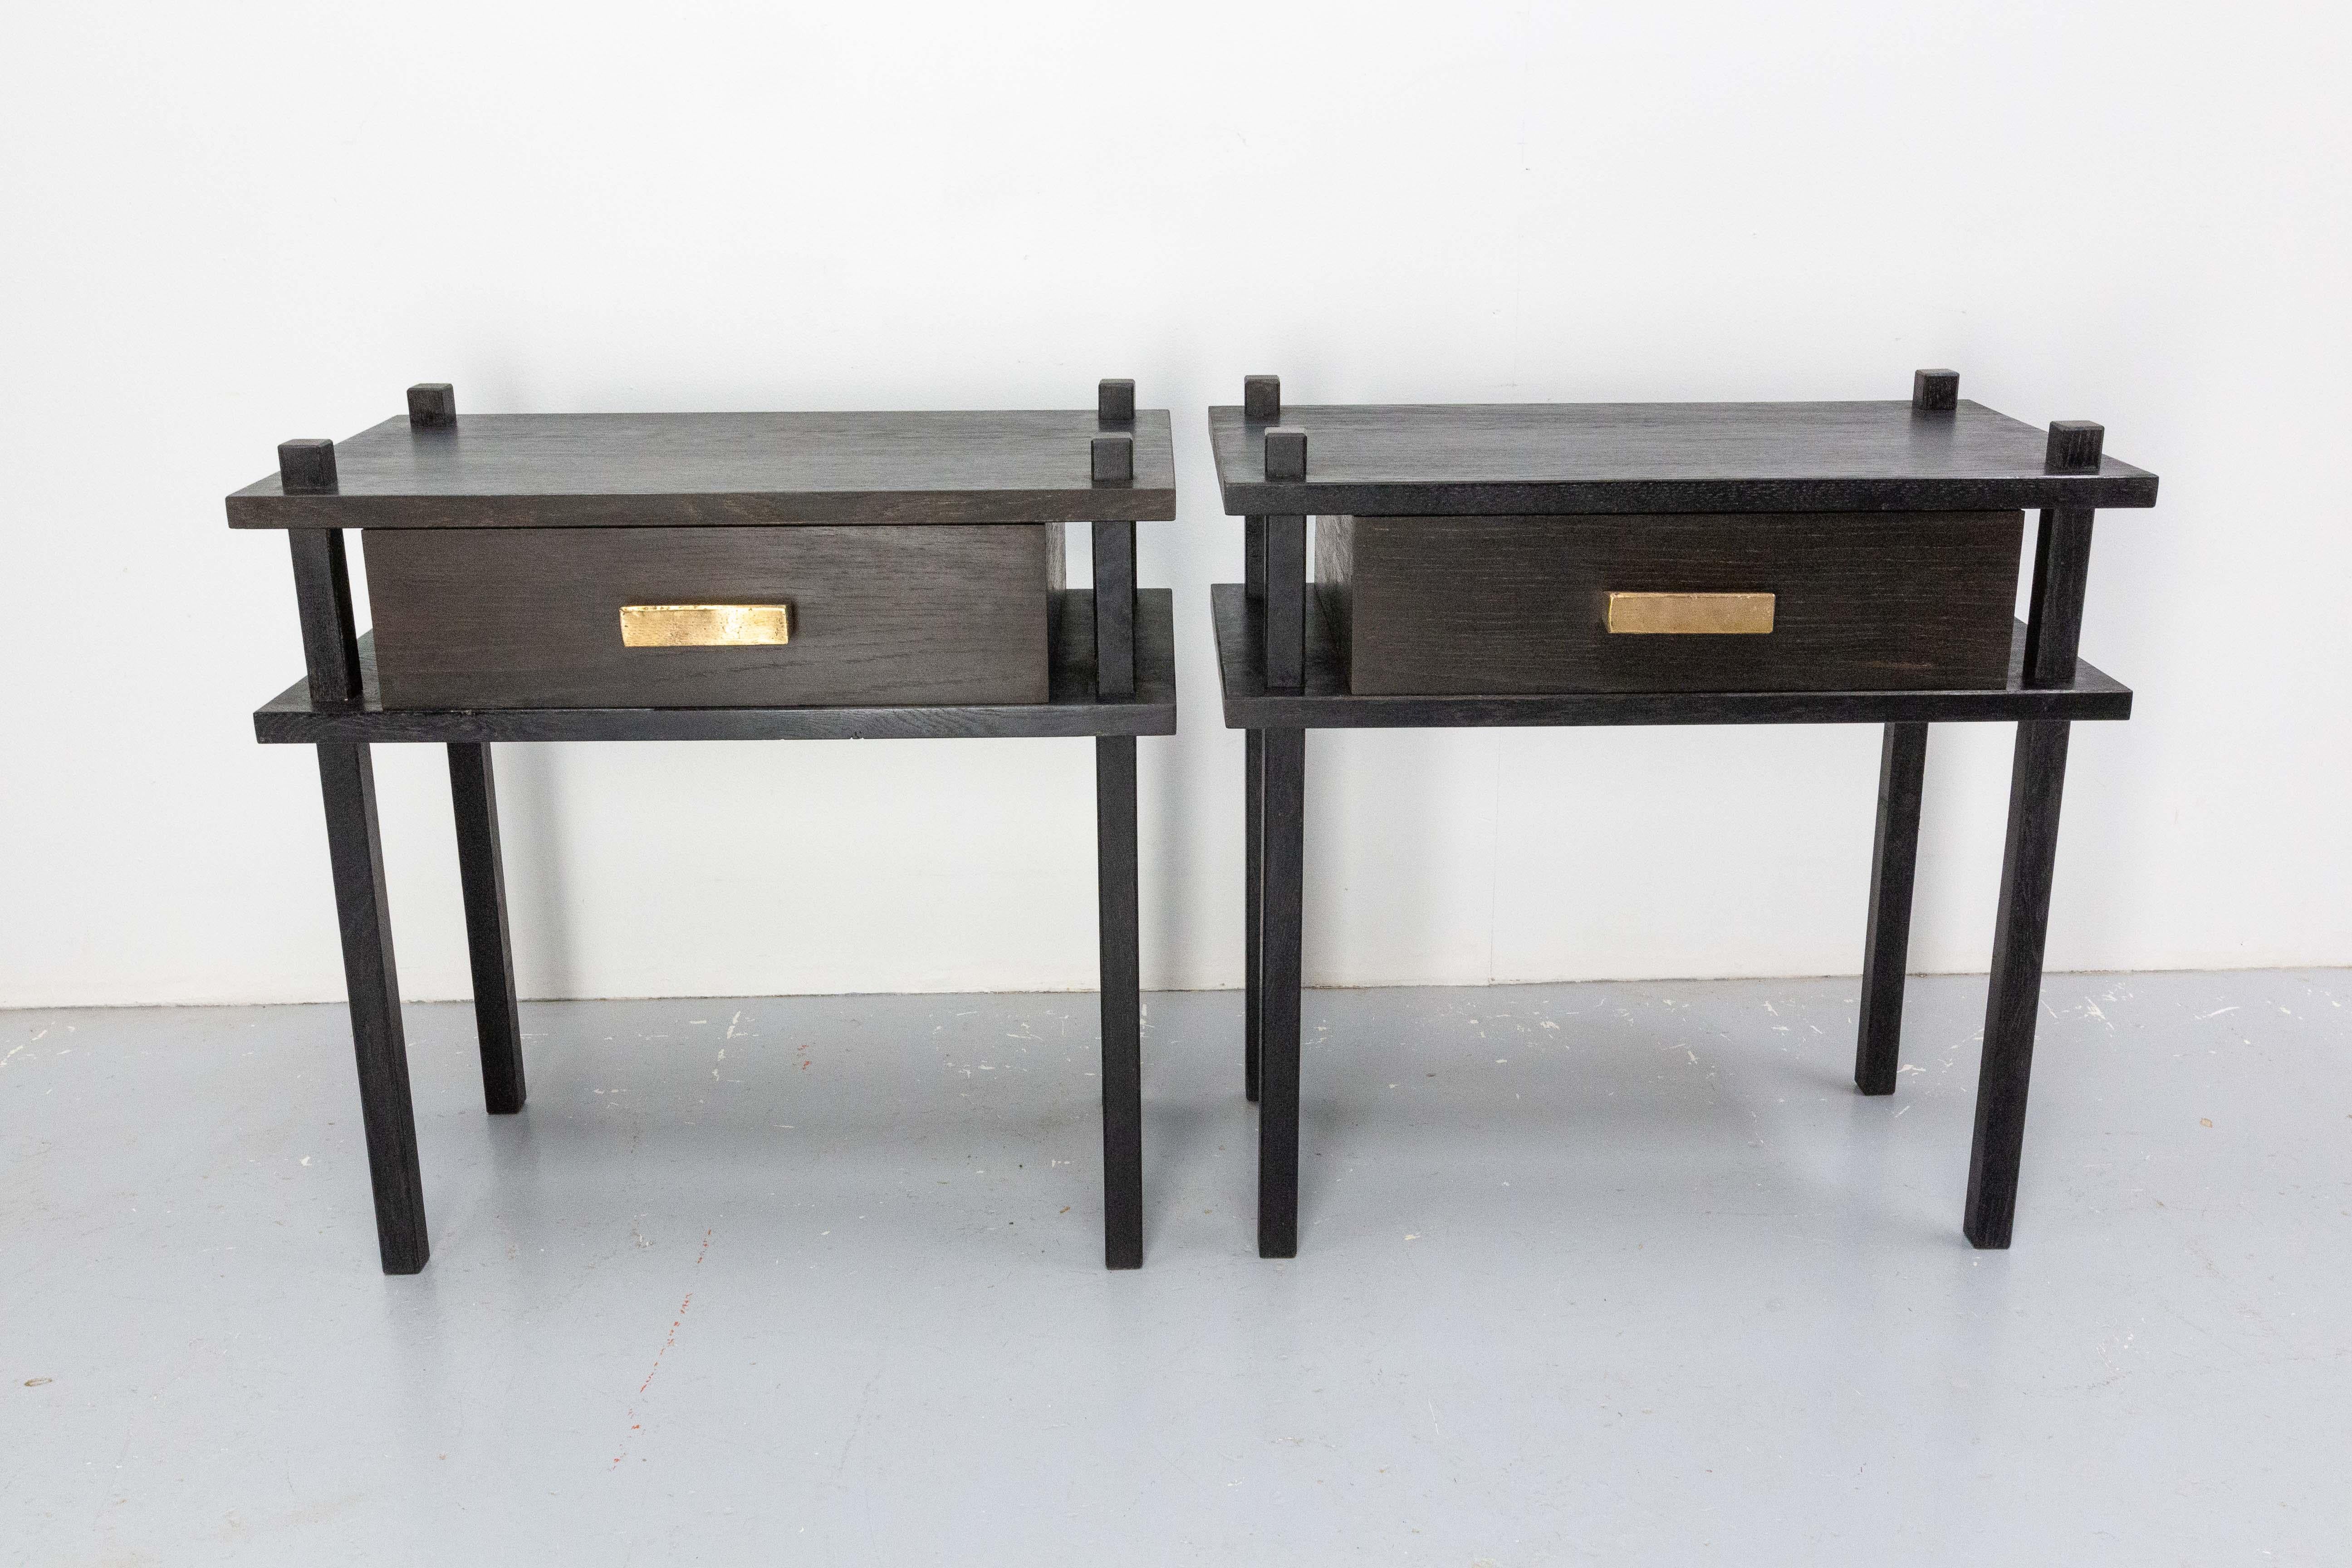 This bedside cabinet cabinet with the traditional technique is brustalist chic style thanks to its simple aesthetic and its bronze handle.
This pair of oak nightstands of the 